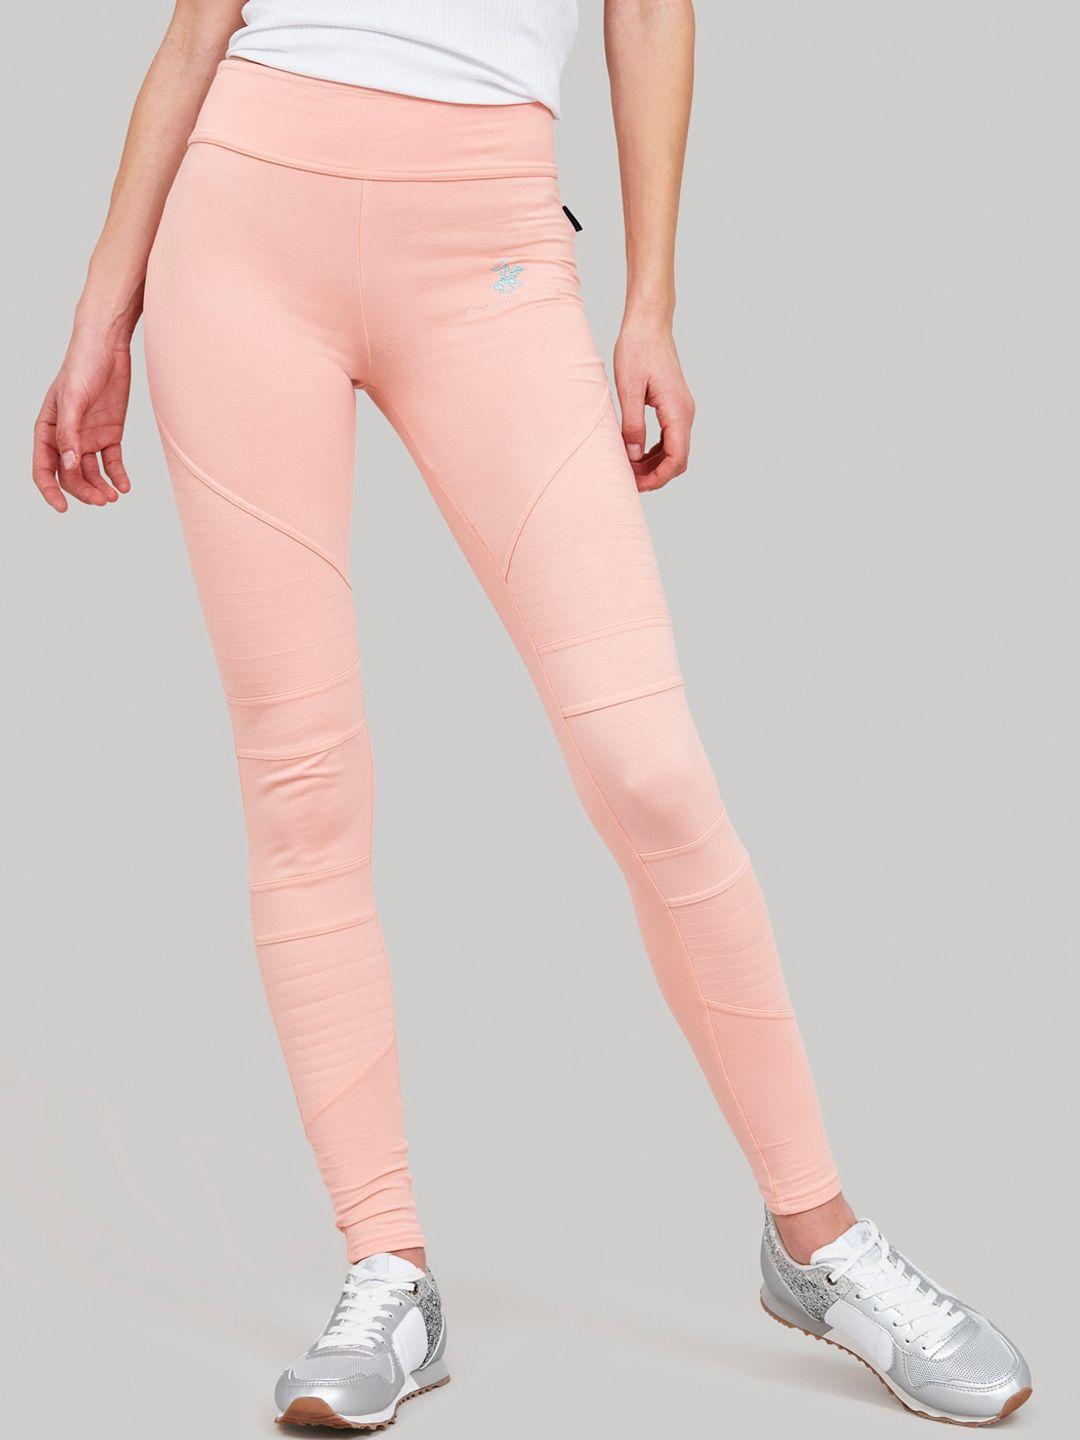 beverly hills polo club women peach solid track pants